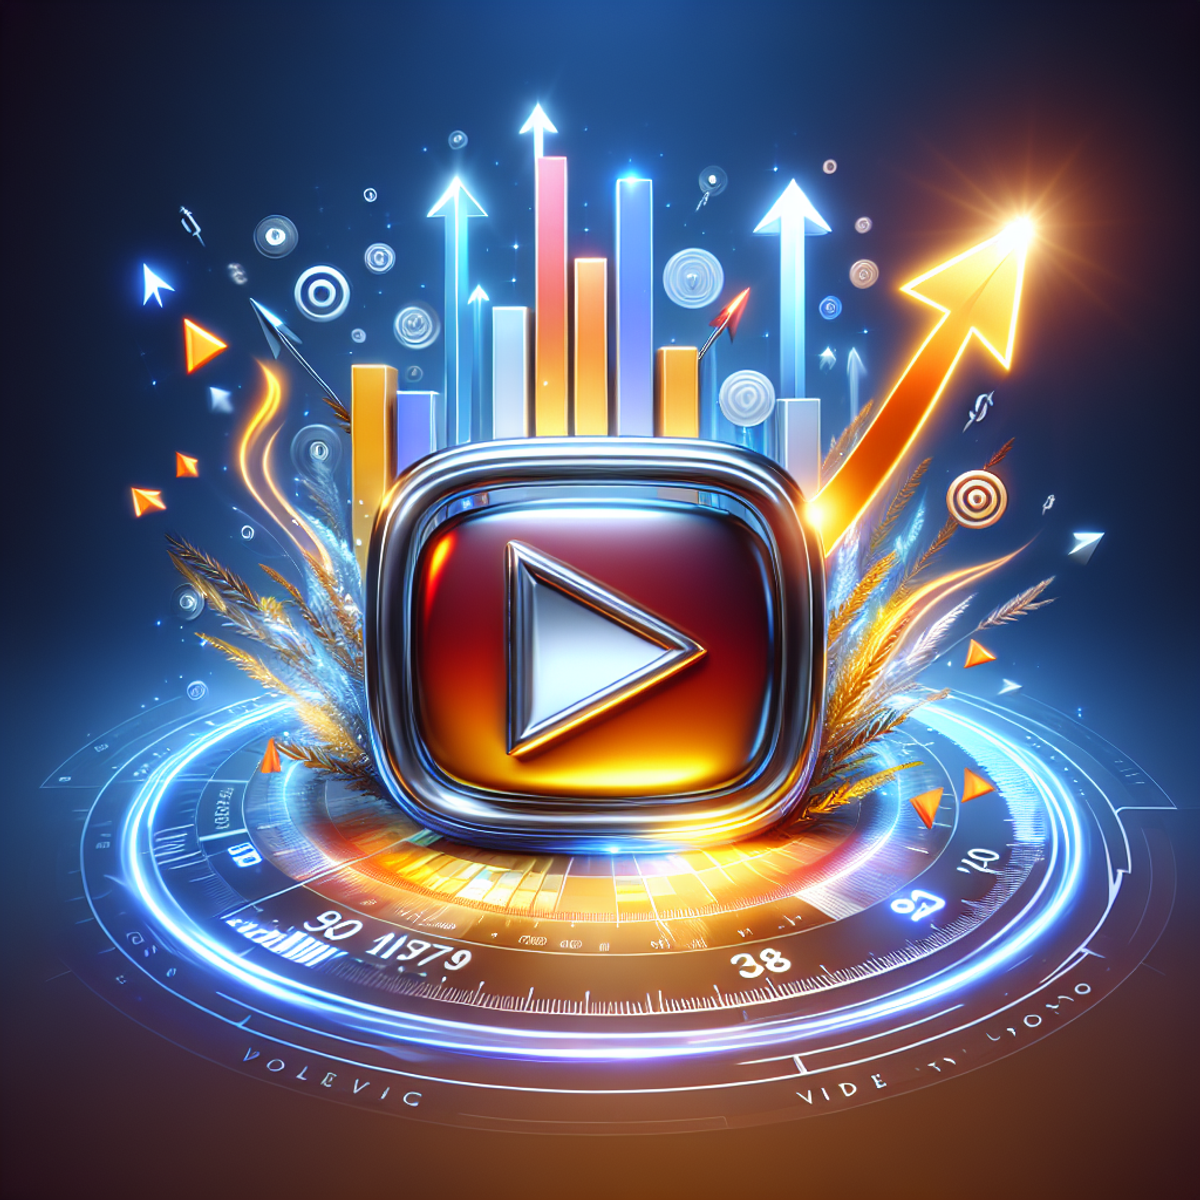 A vibrant image of a large polished play button surrounded by energetic, upward-pointing arrows, symbolizing growth and visibility achieved through efficient YouTube SEO.